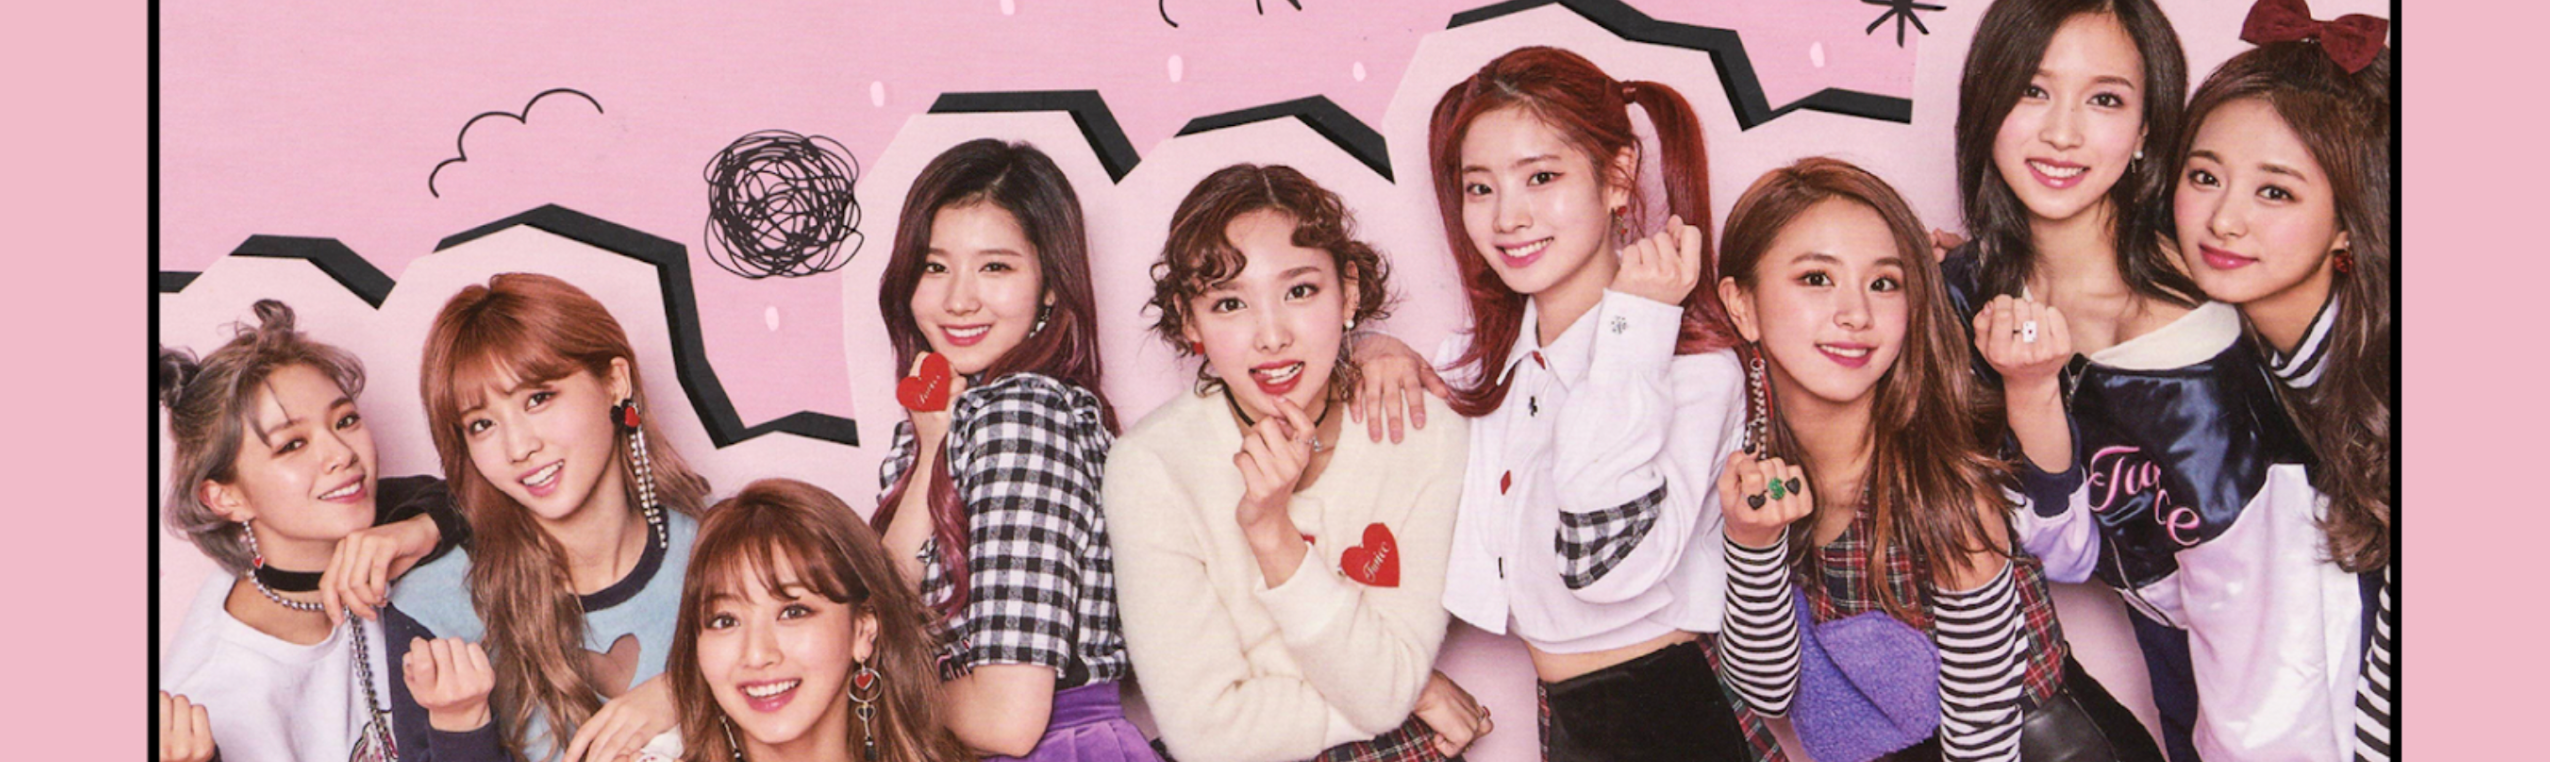 Get to know Twice: A guide to the K-pop girl group's members, tour